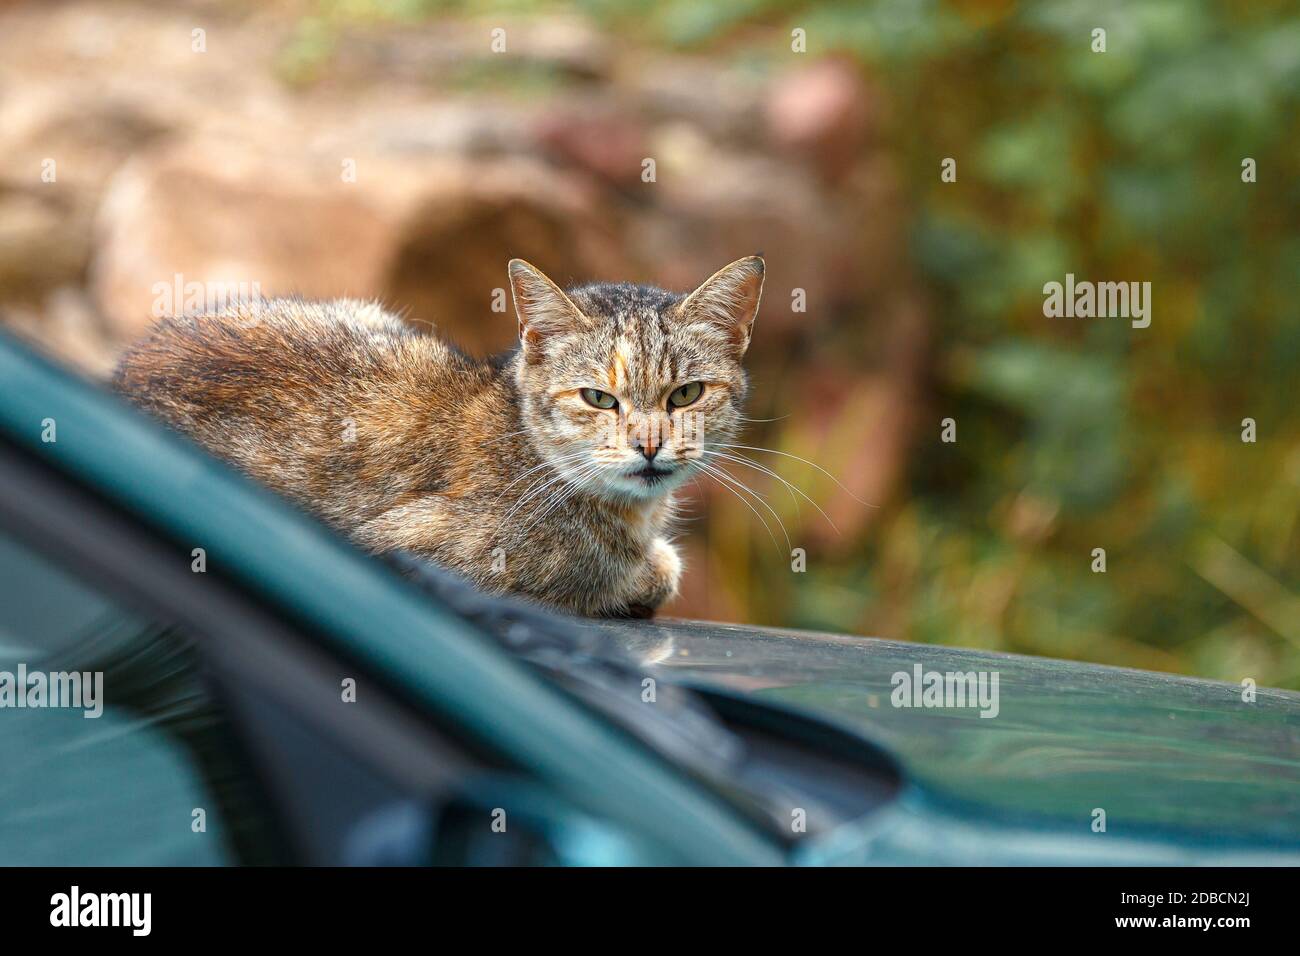 Sick cat basking on the hood of the car. Stock Photo